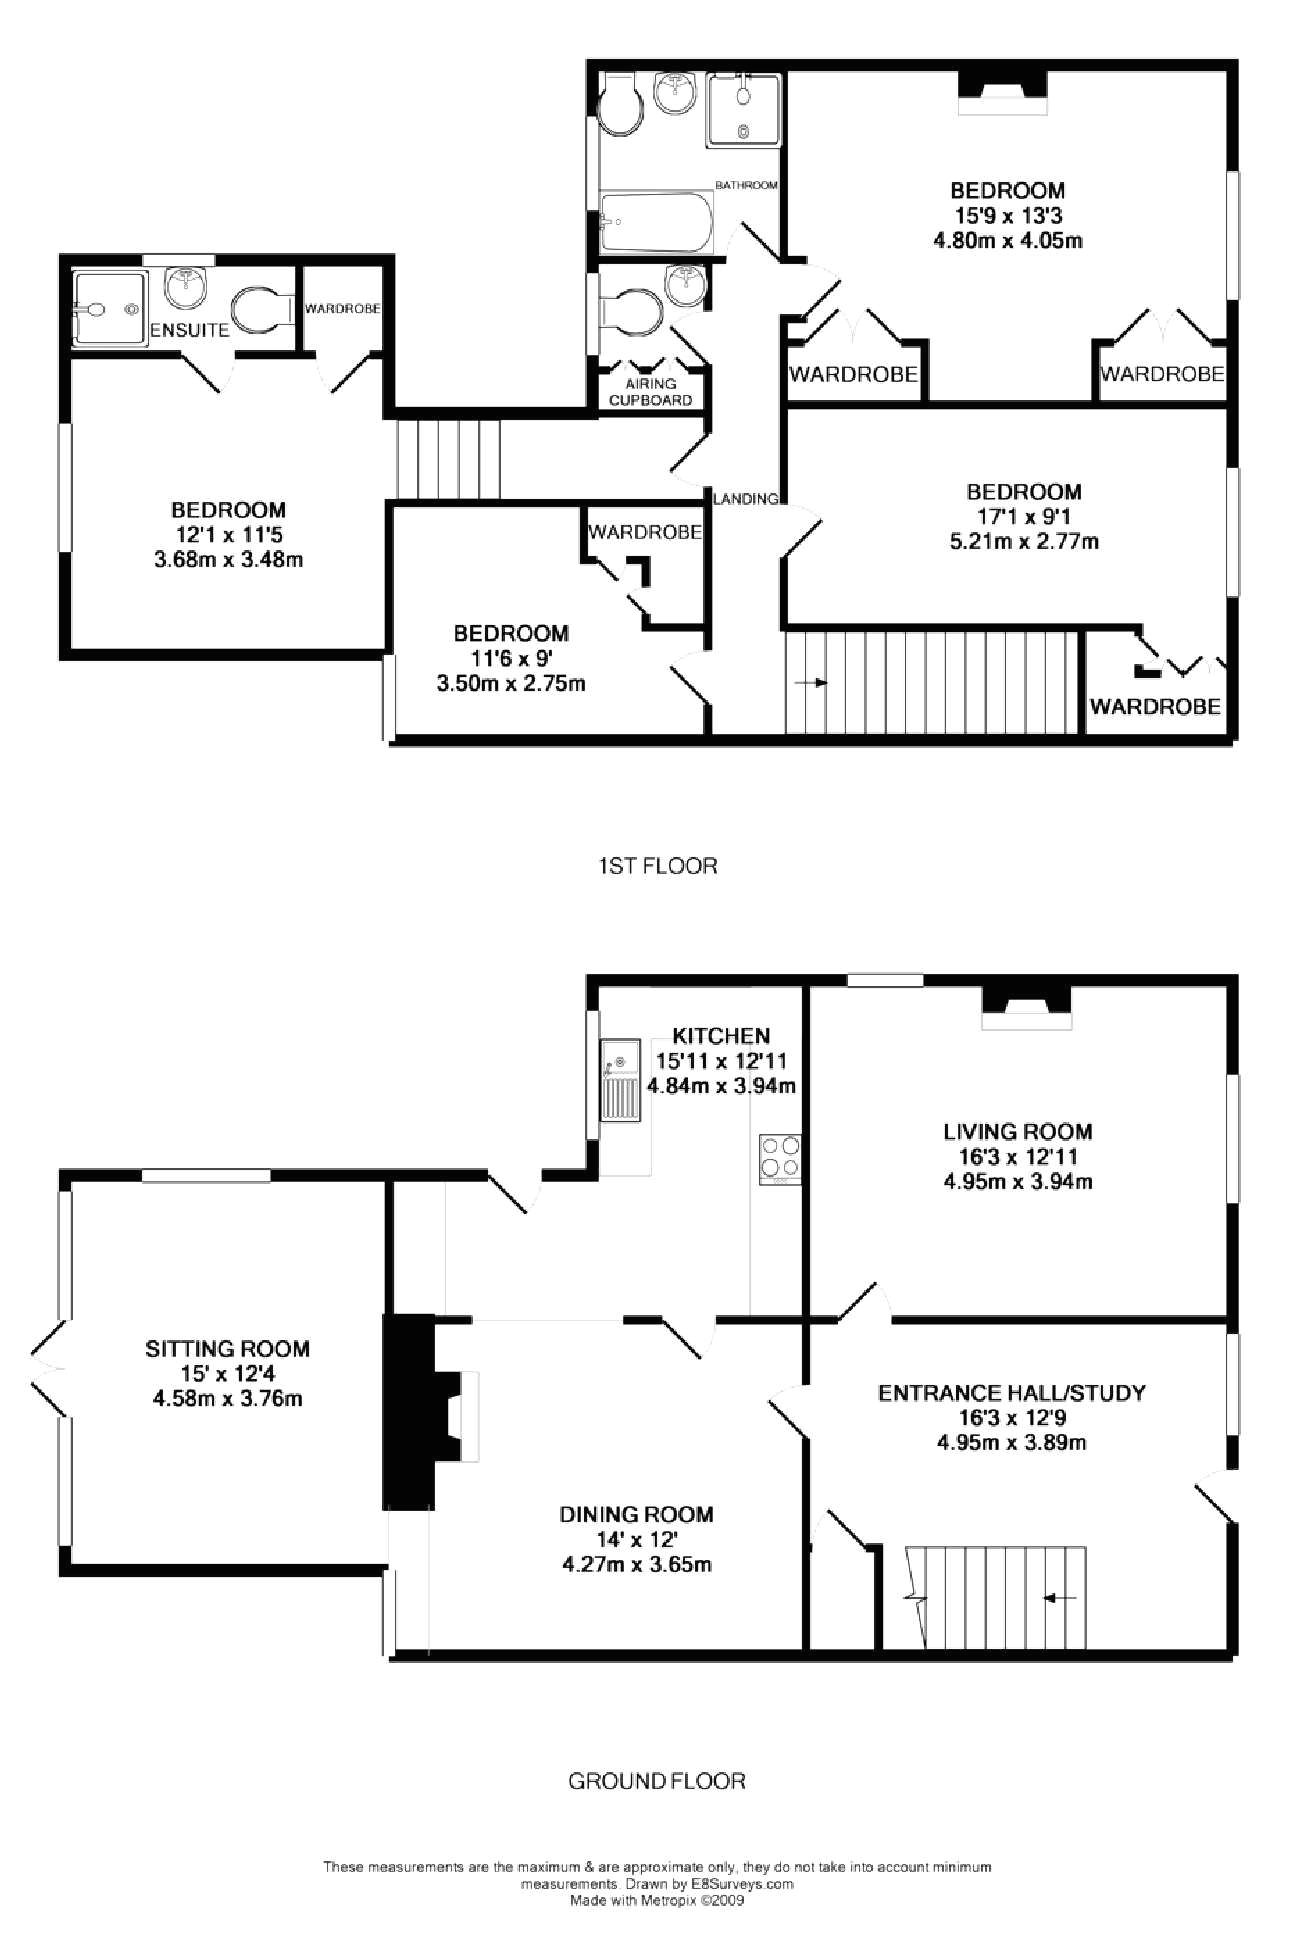 Drawing Easy Buildings Home Building Plans Lovely Easy Build Home Plans New Building Plans